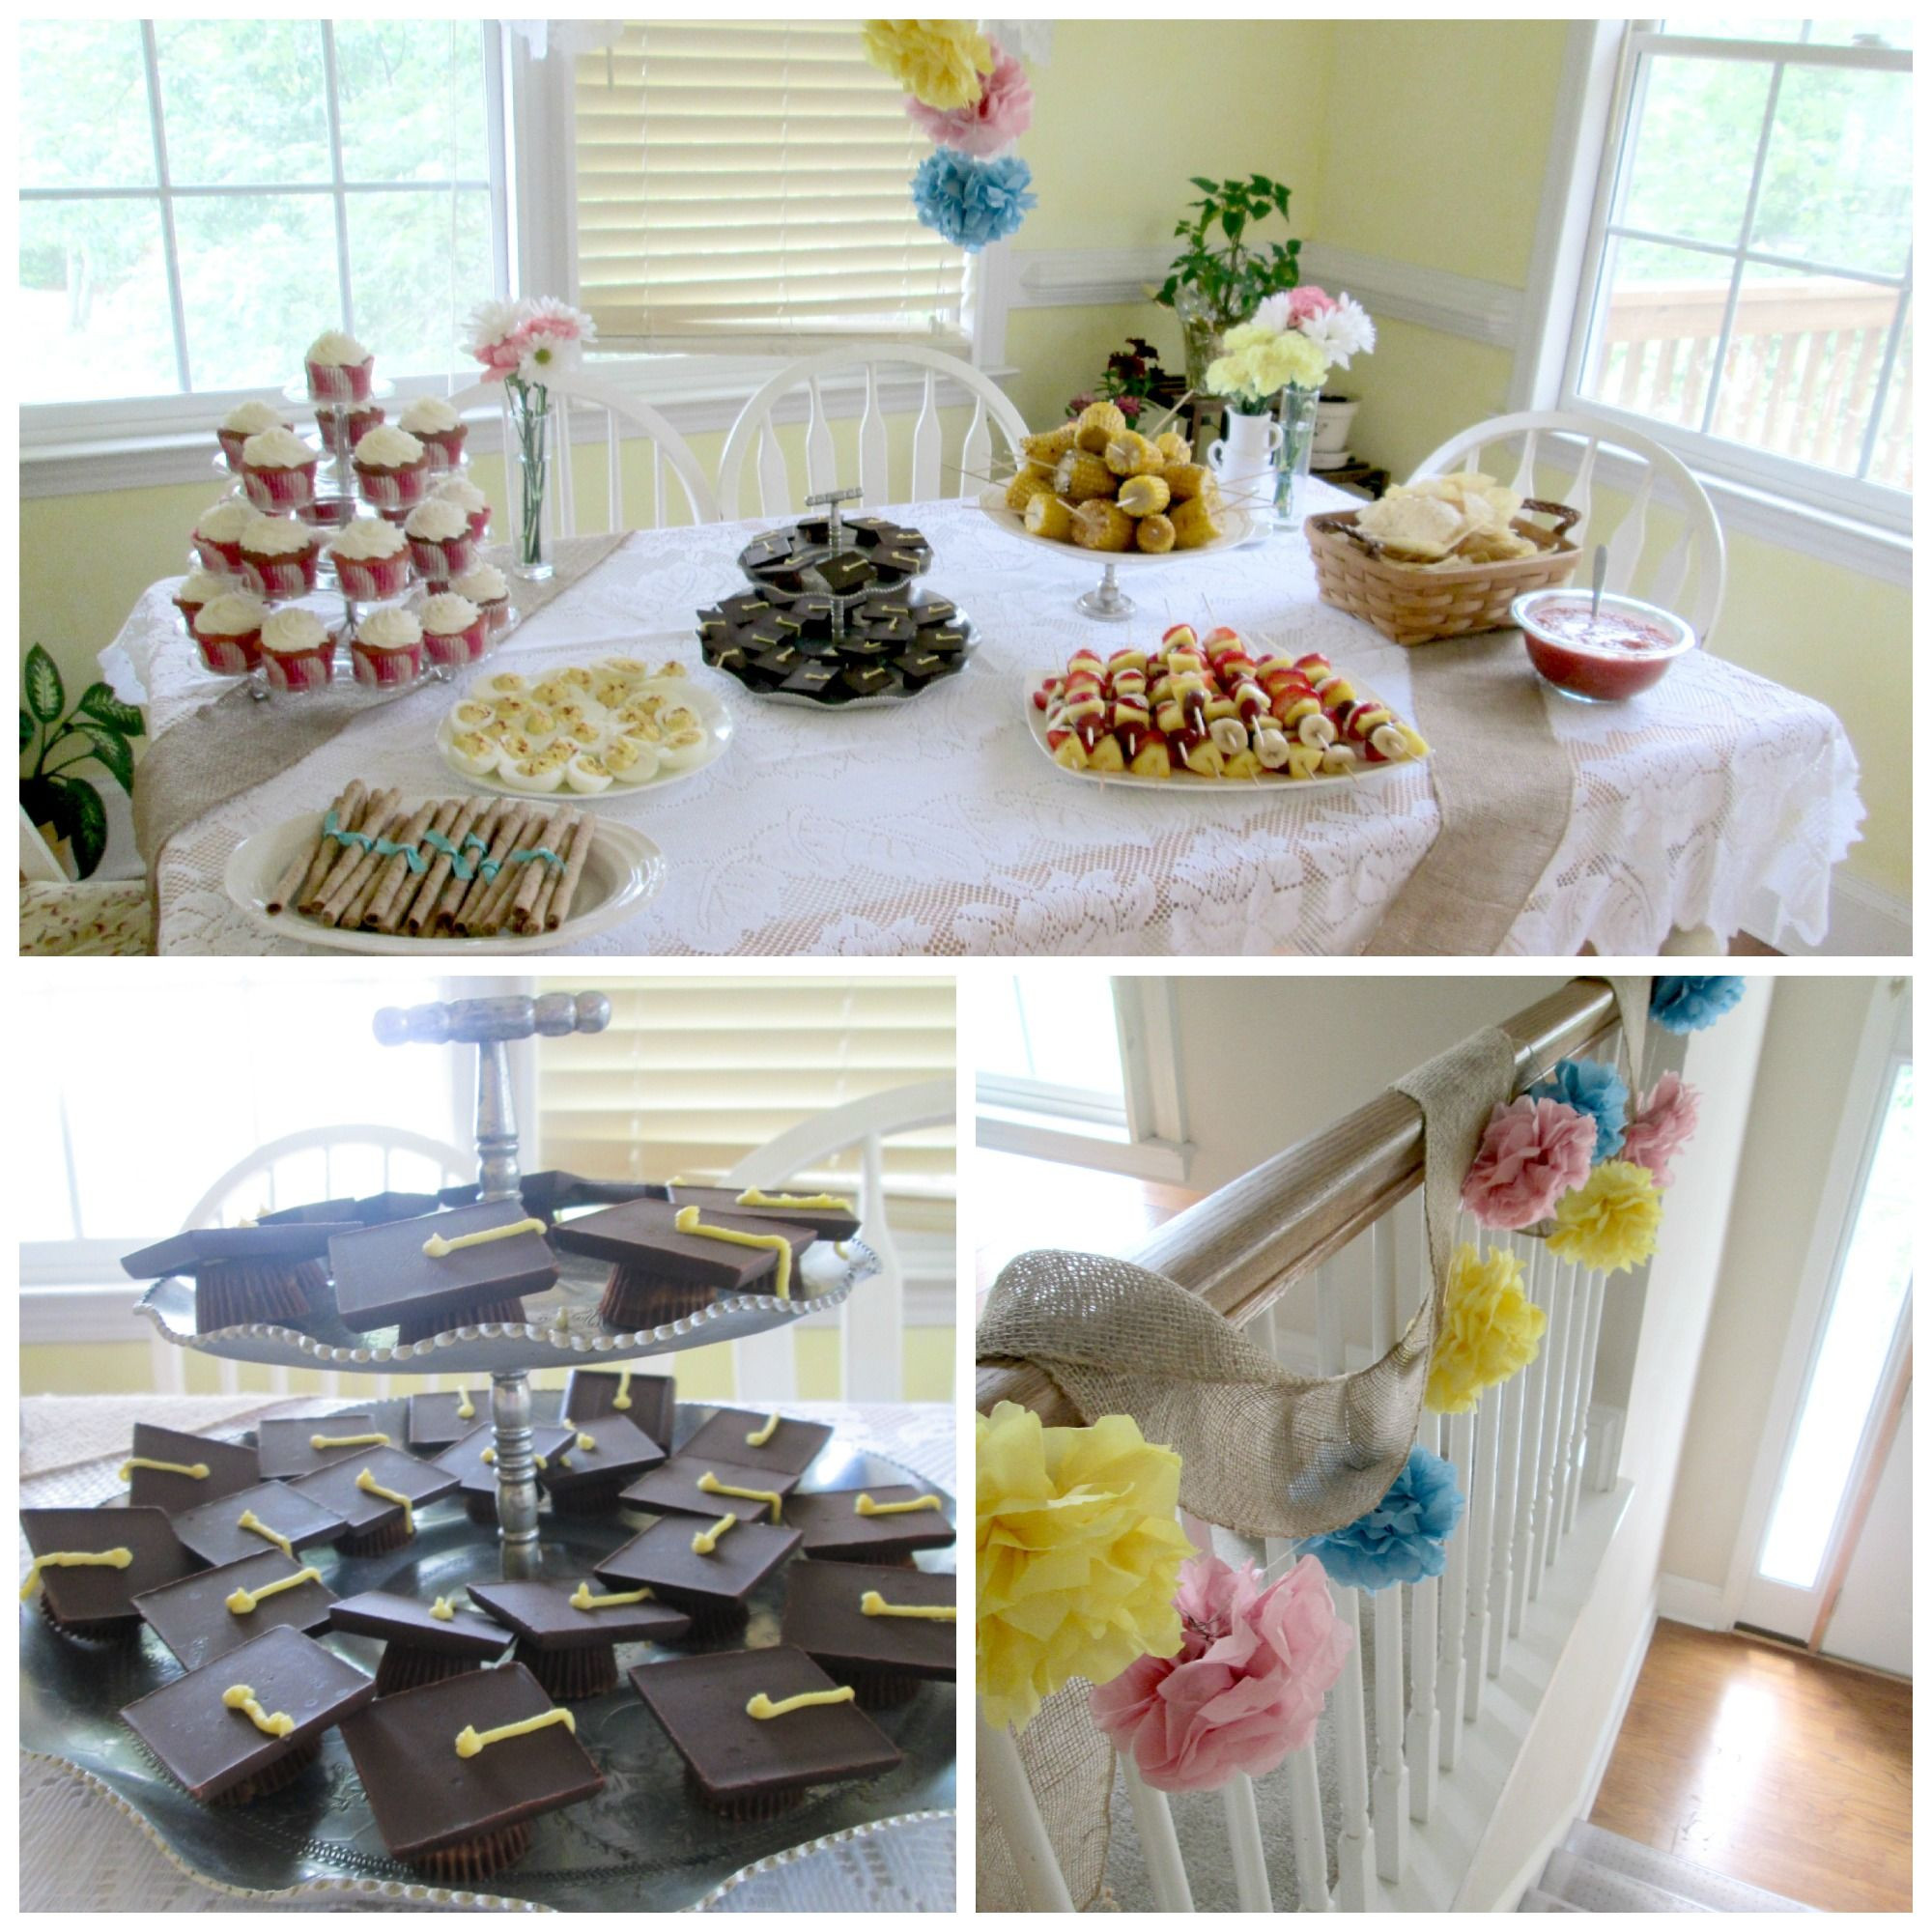 Graduation Party Catering Ideas
 classy graduation party Graduation Party